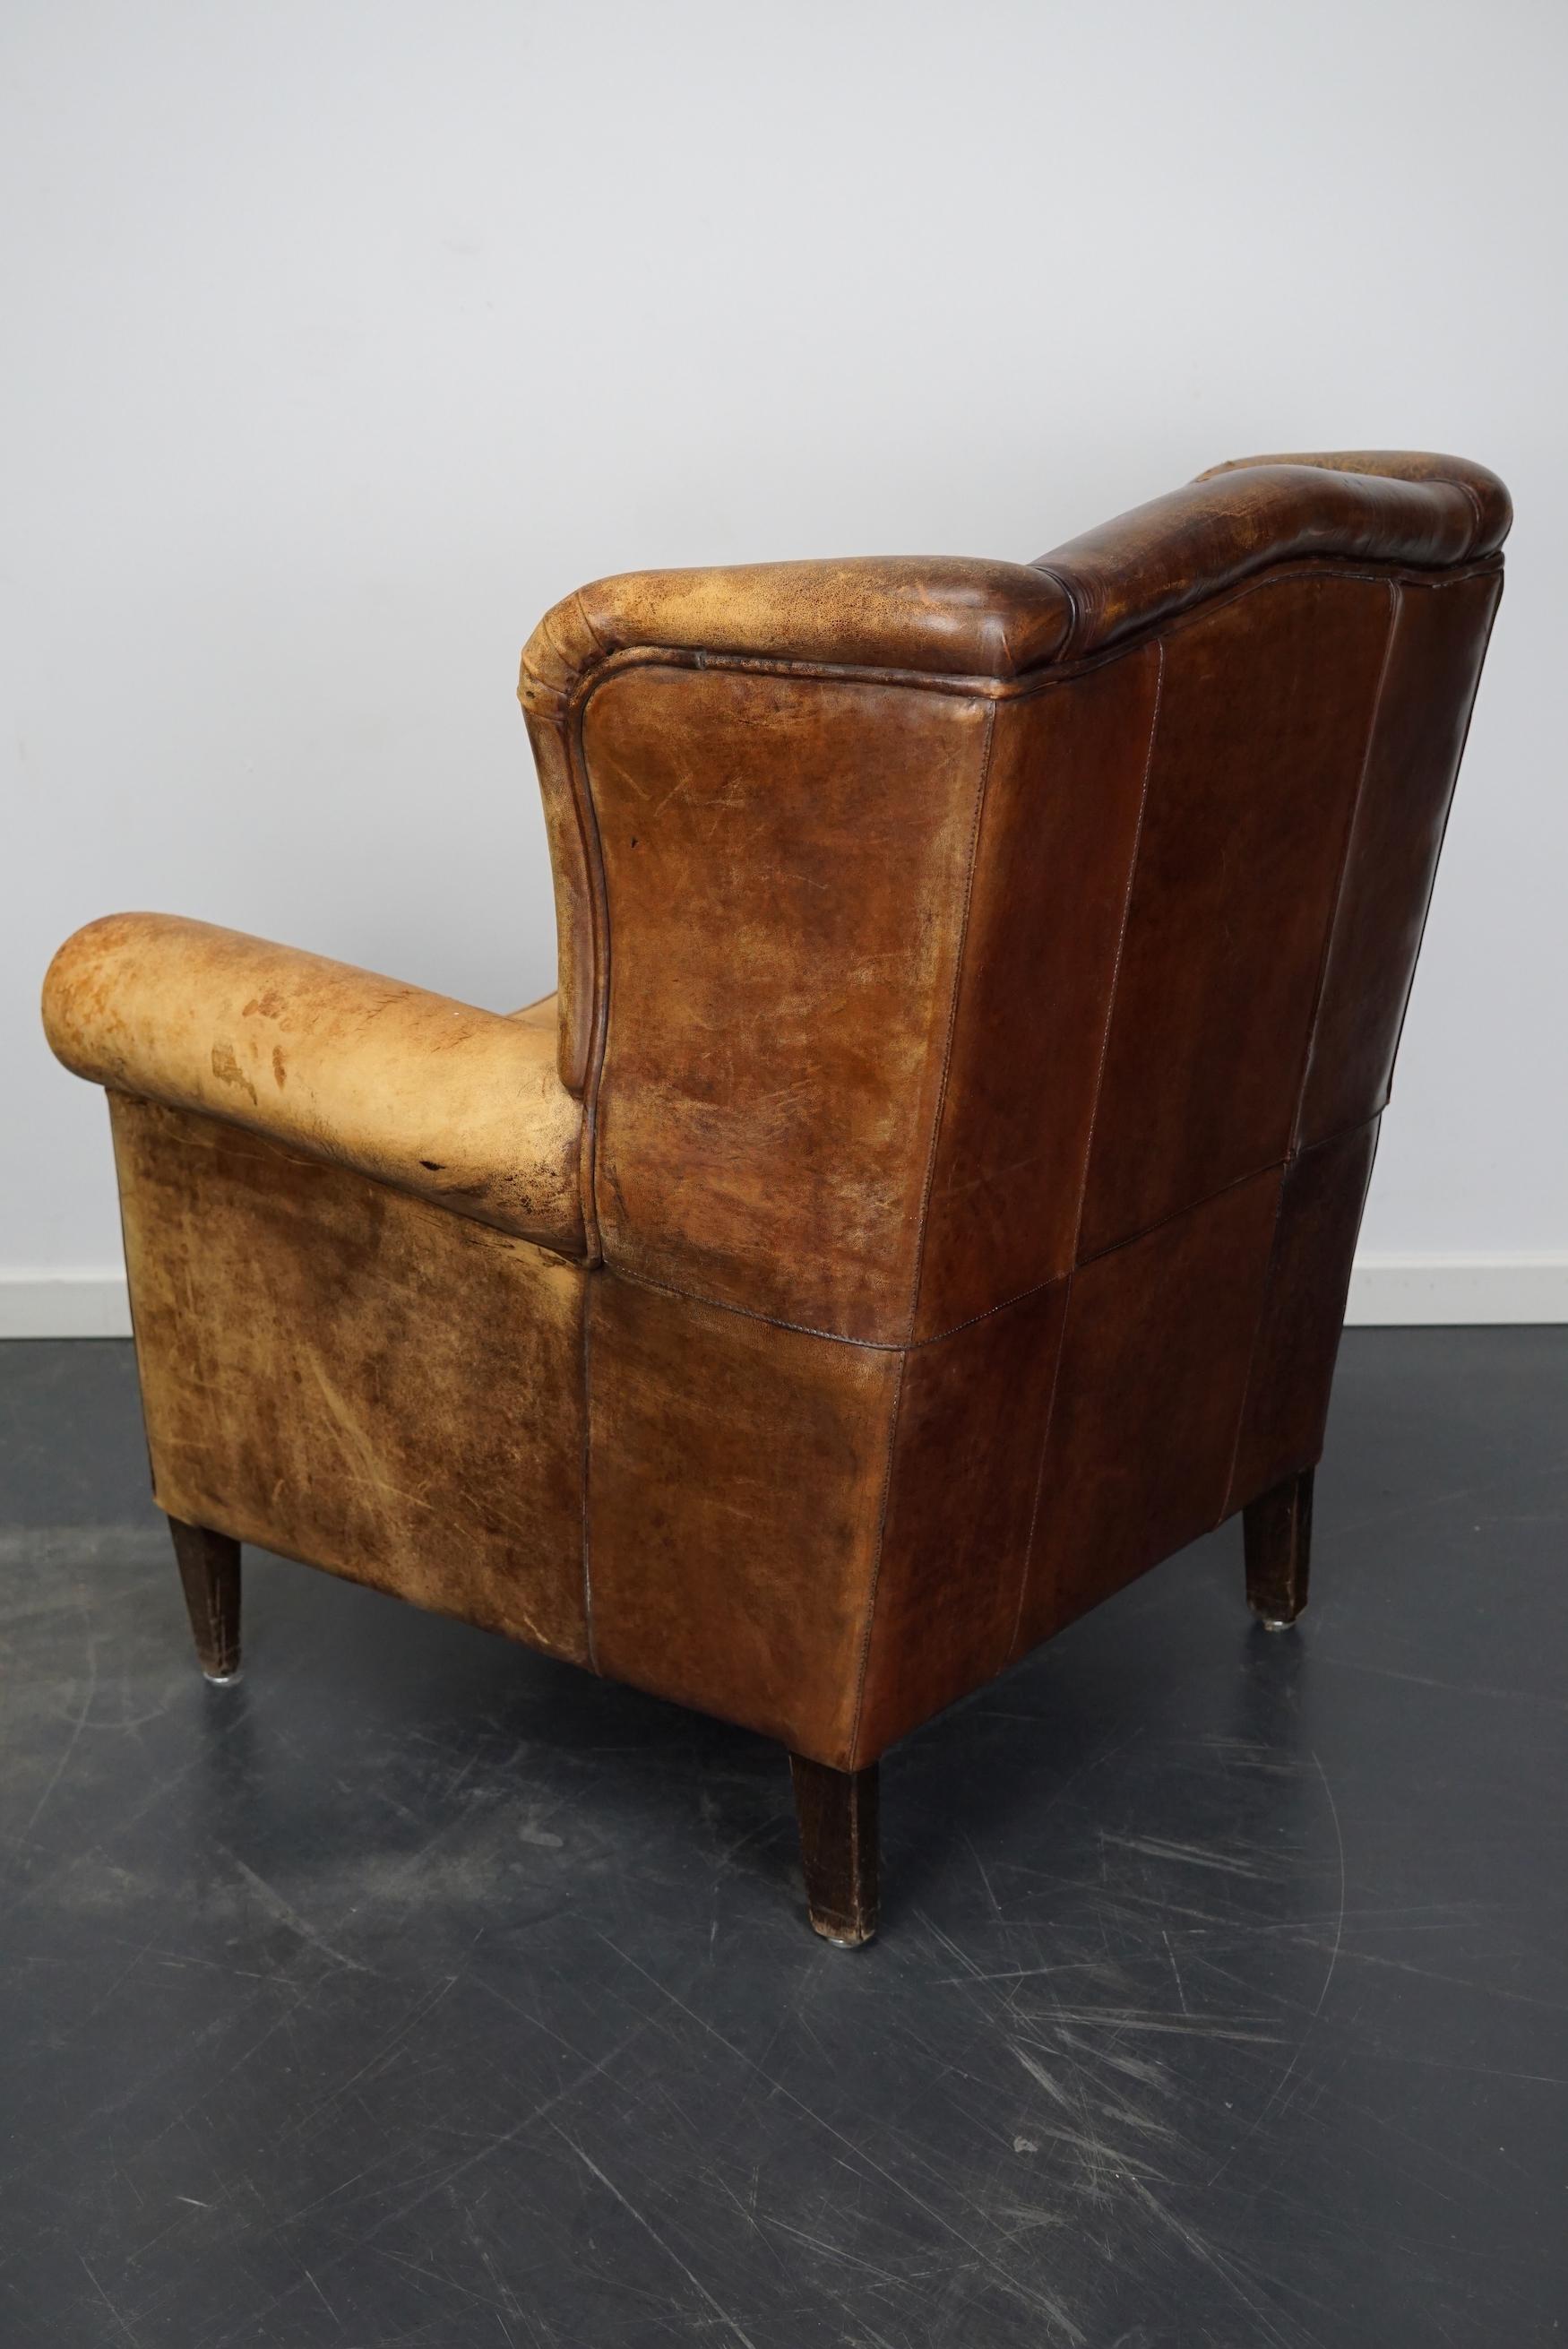 Industrial Vintage Dutch Cognac Colored Wingback Leather Club Chair For Sale